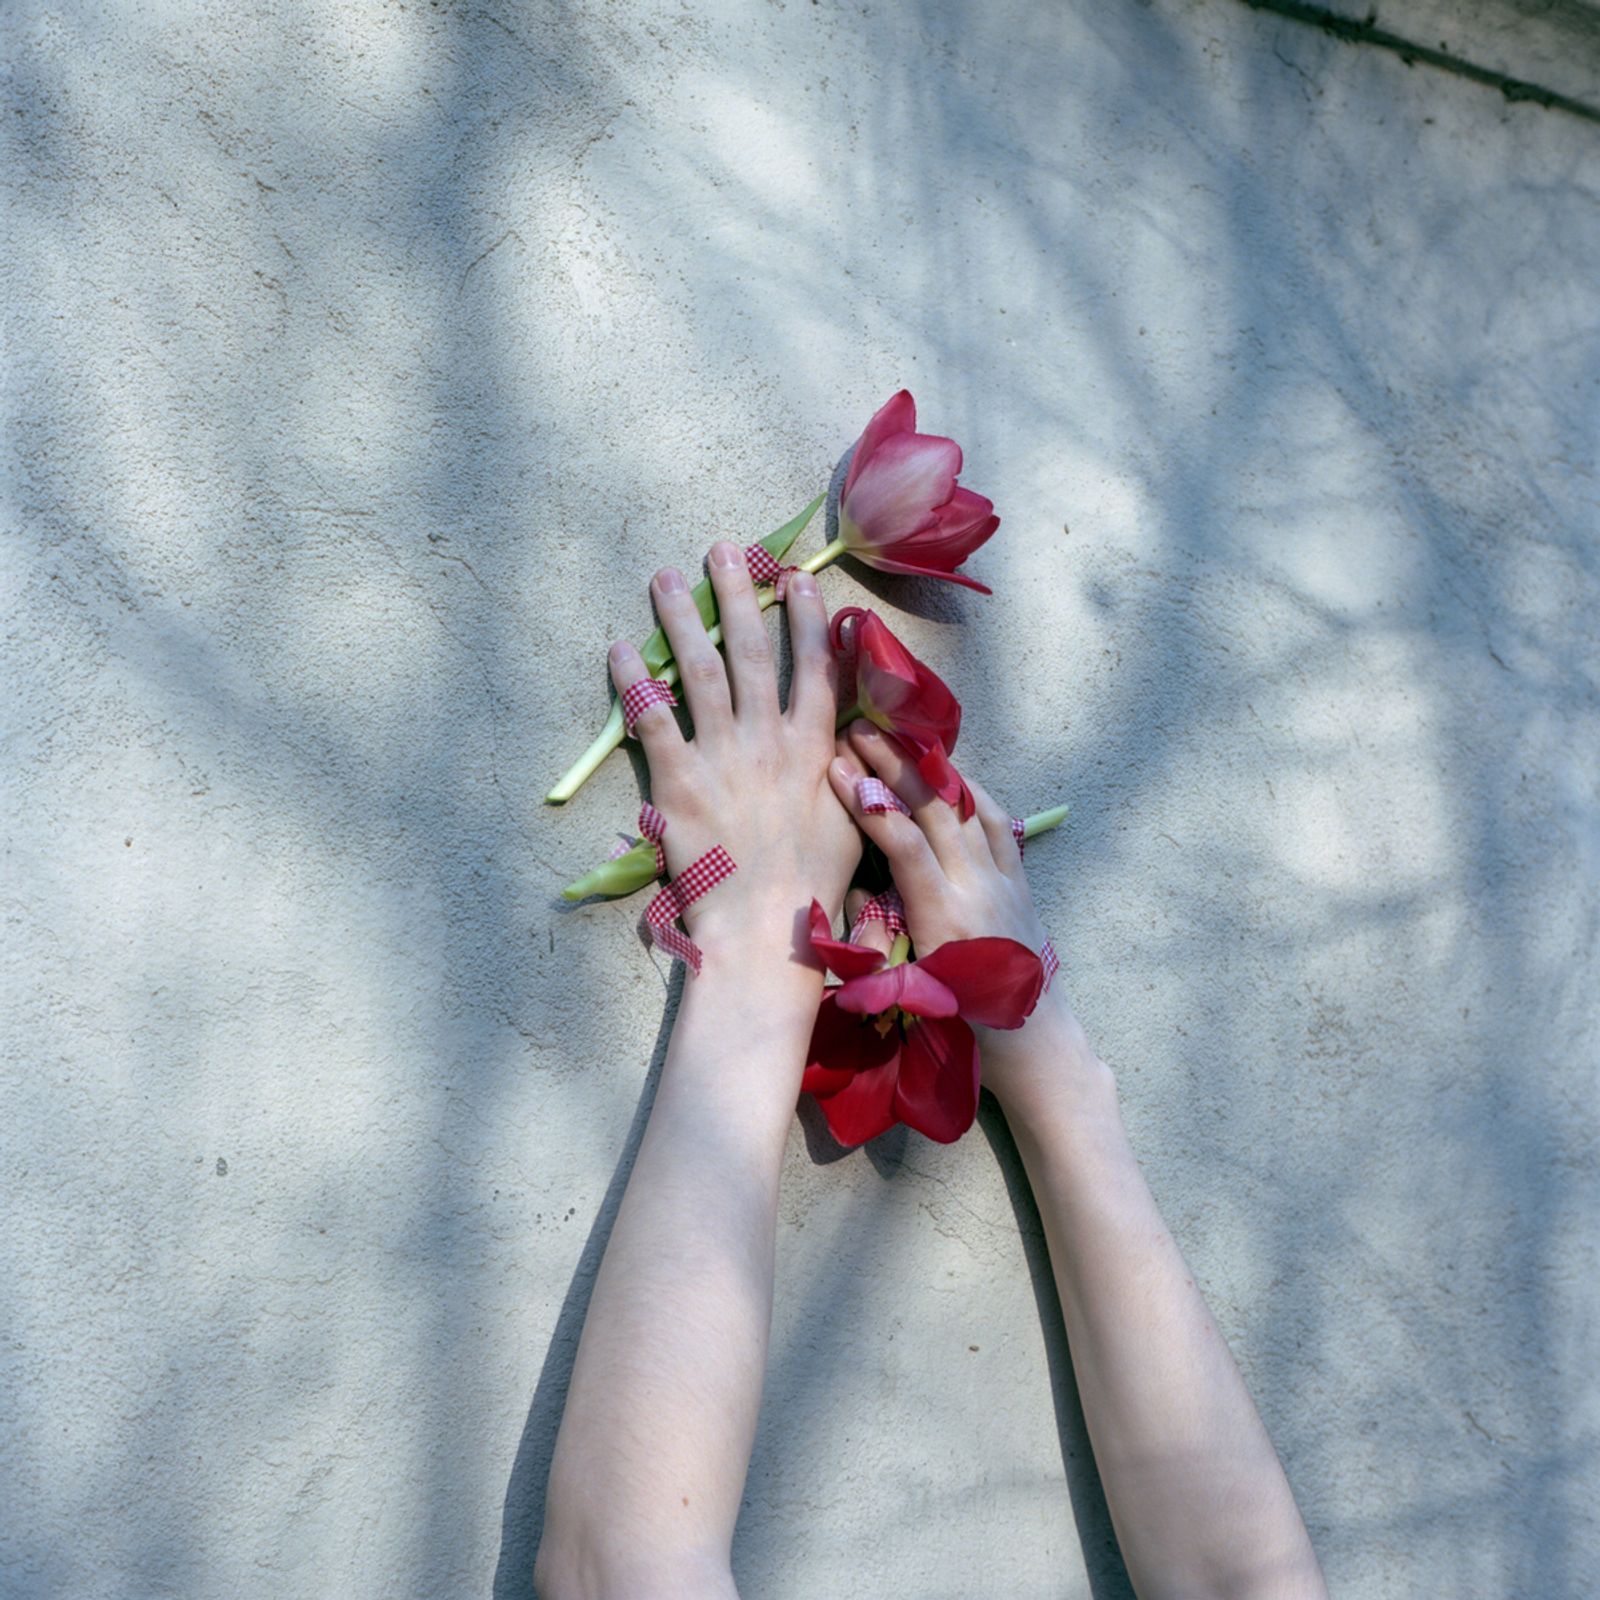 © Alena Kakhanovich - Image from the THE WALL photography project